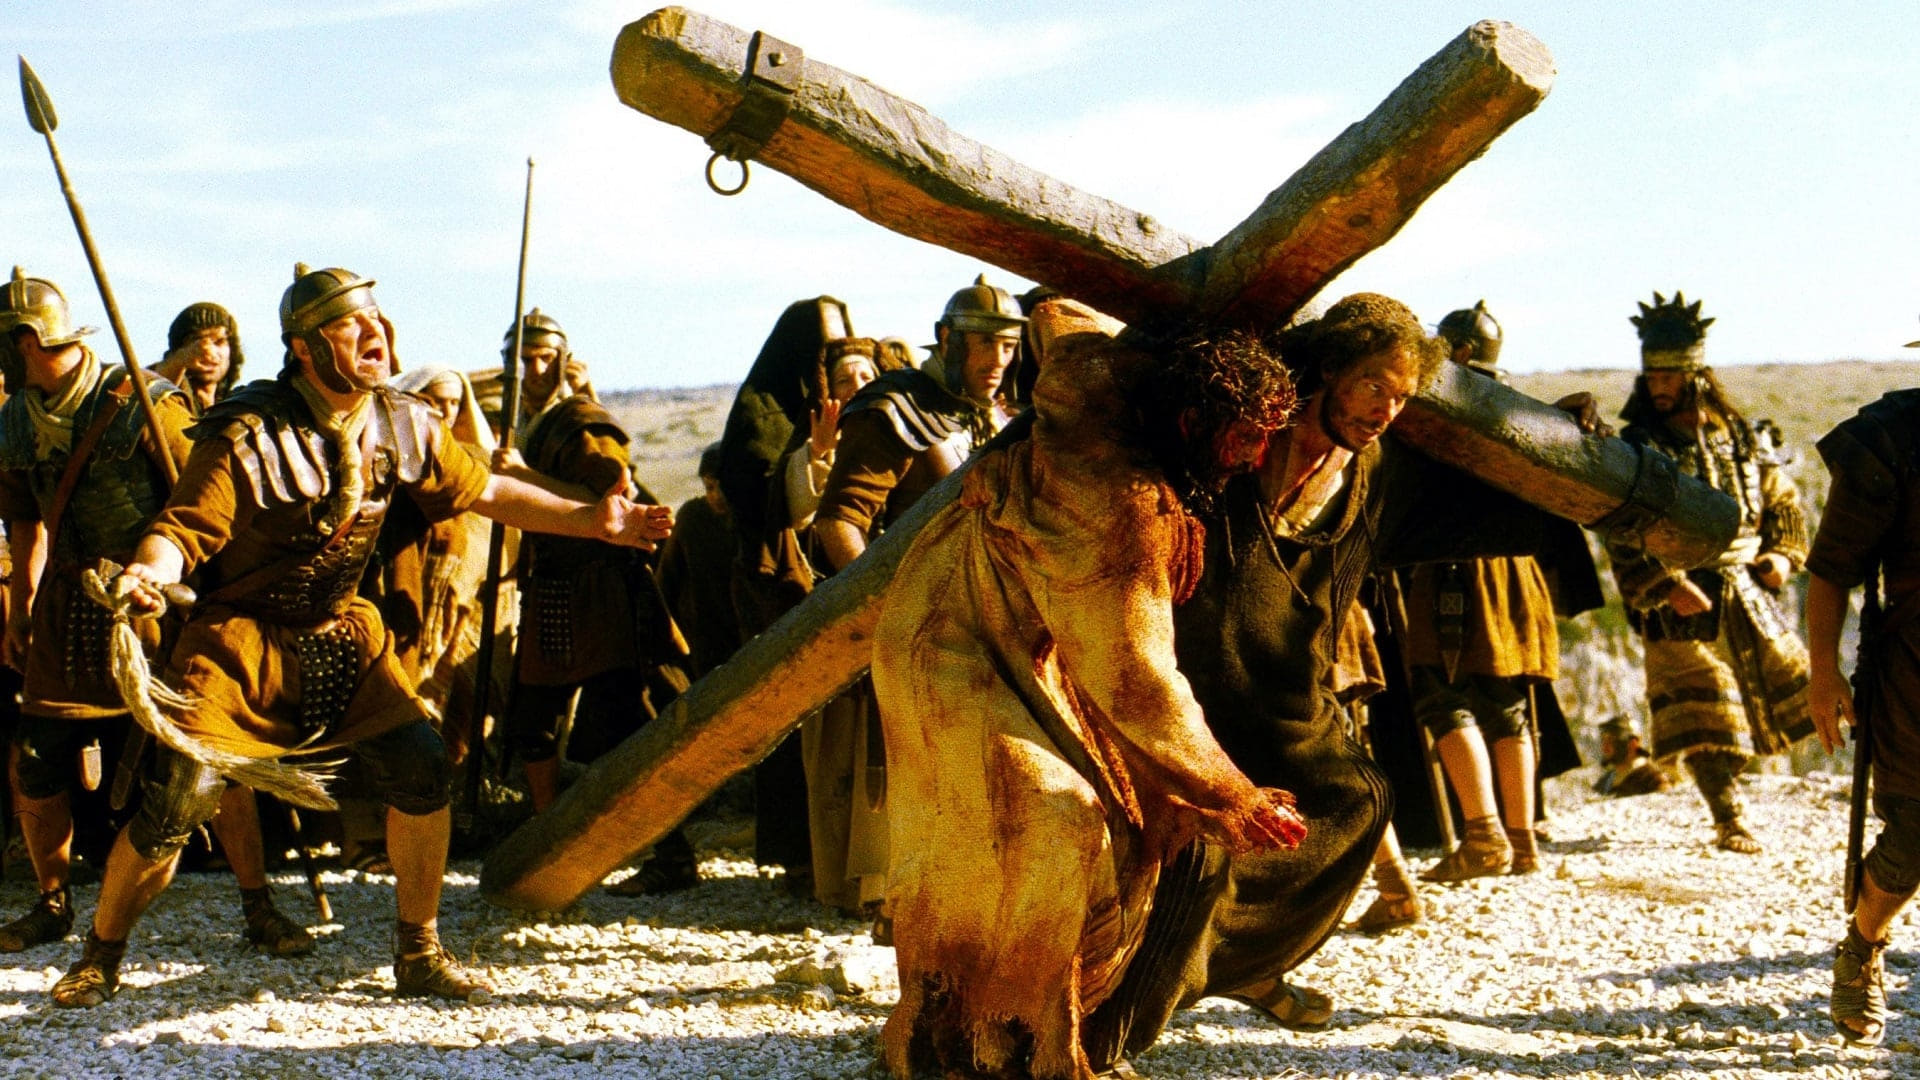 The Passion of the Christ: Resurrection, Part One (1970)